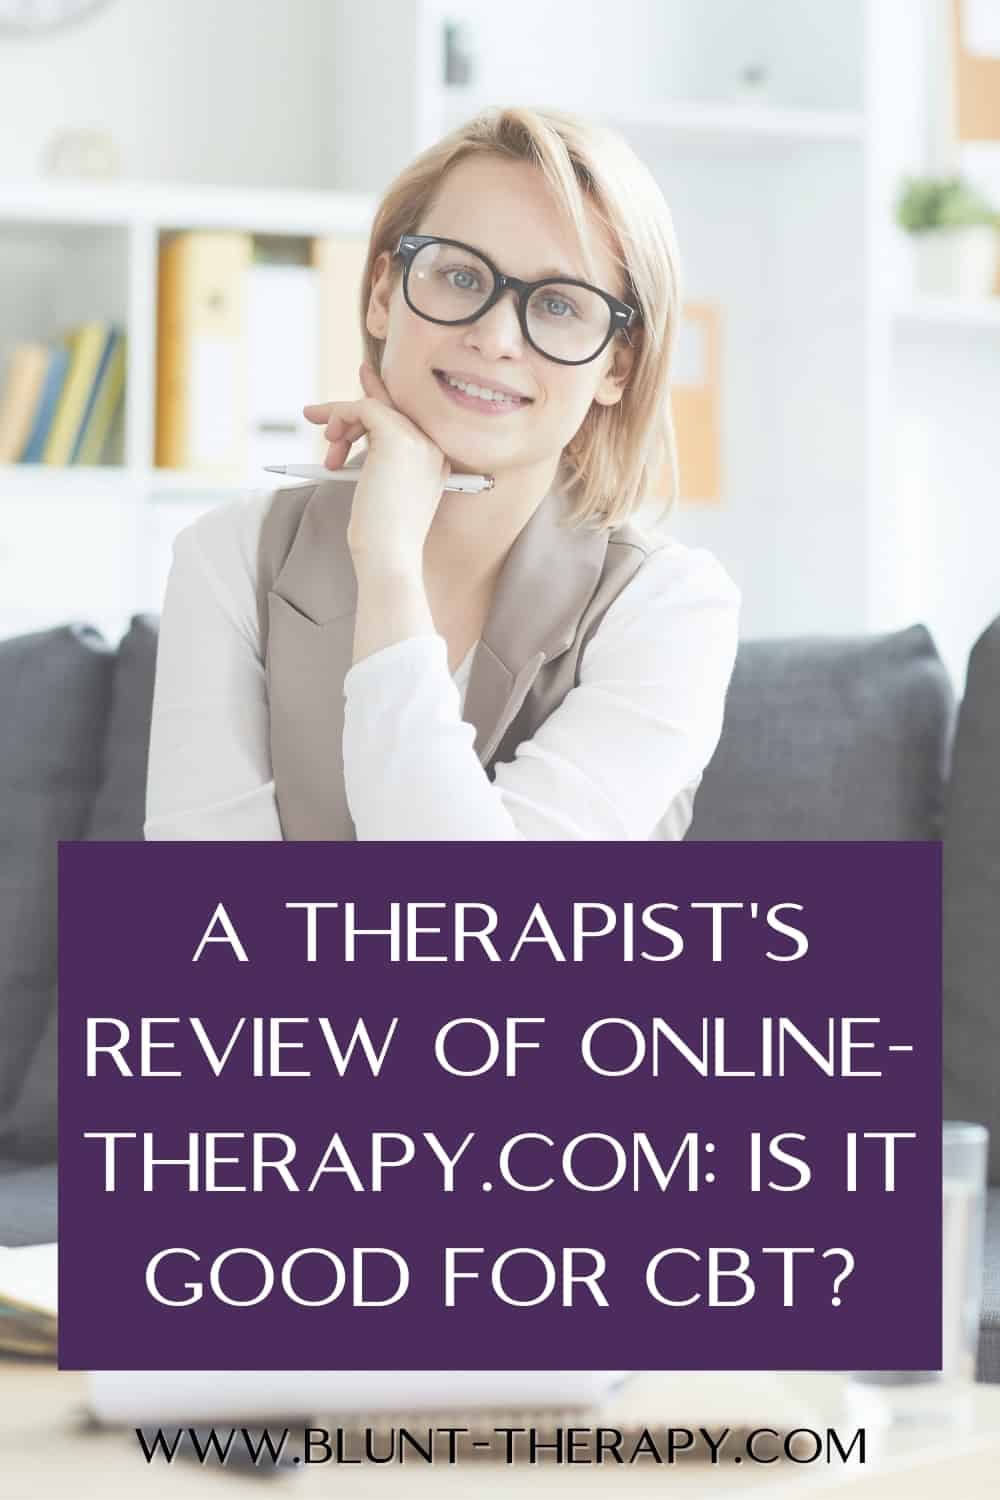 Online-therapy.com review